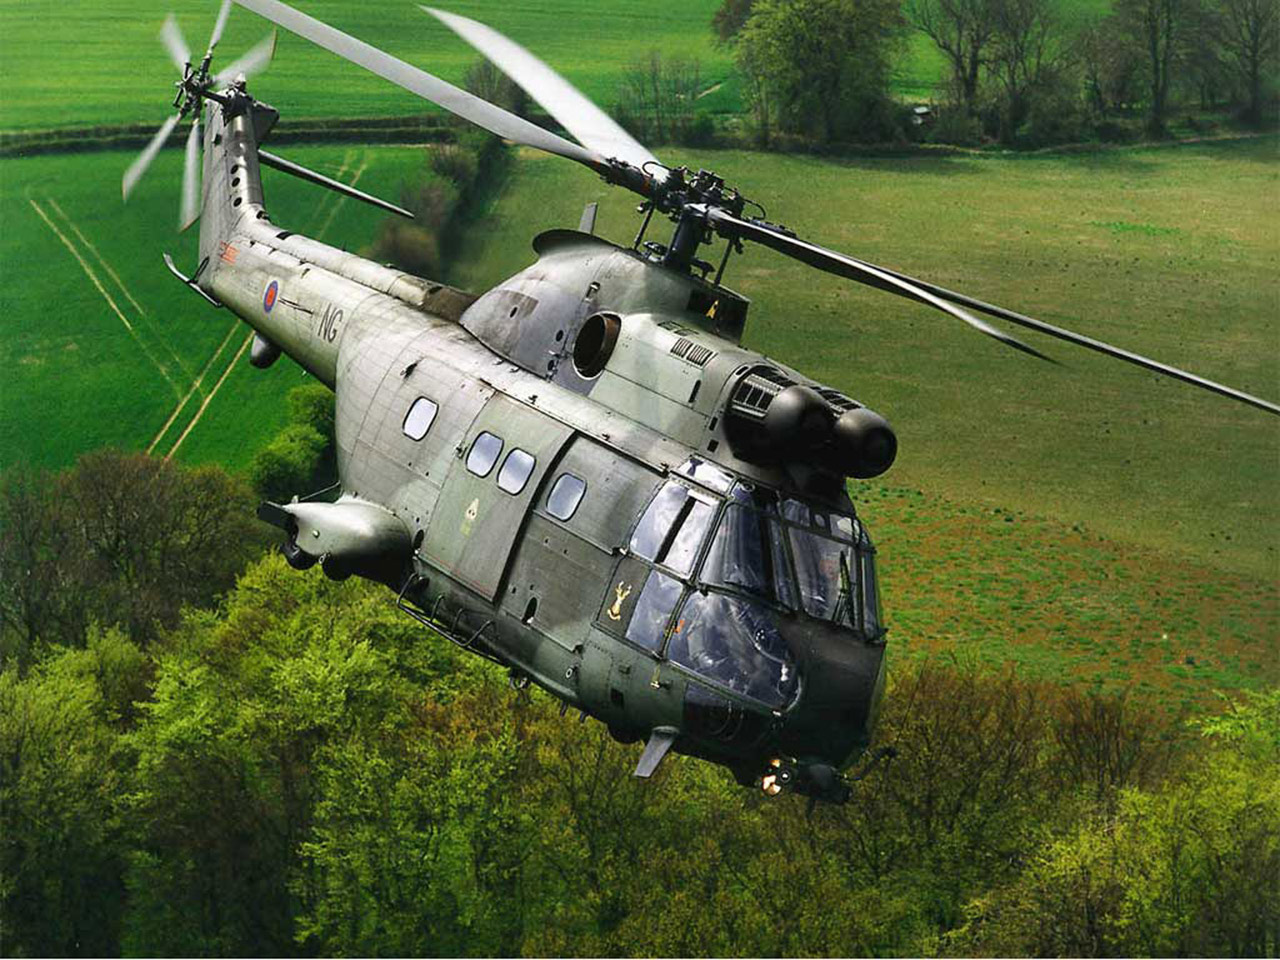 Puma Helicopter Army And Navy Wallpaper Puter Desktop